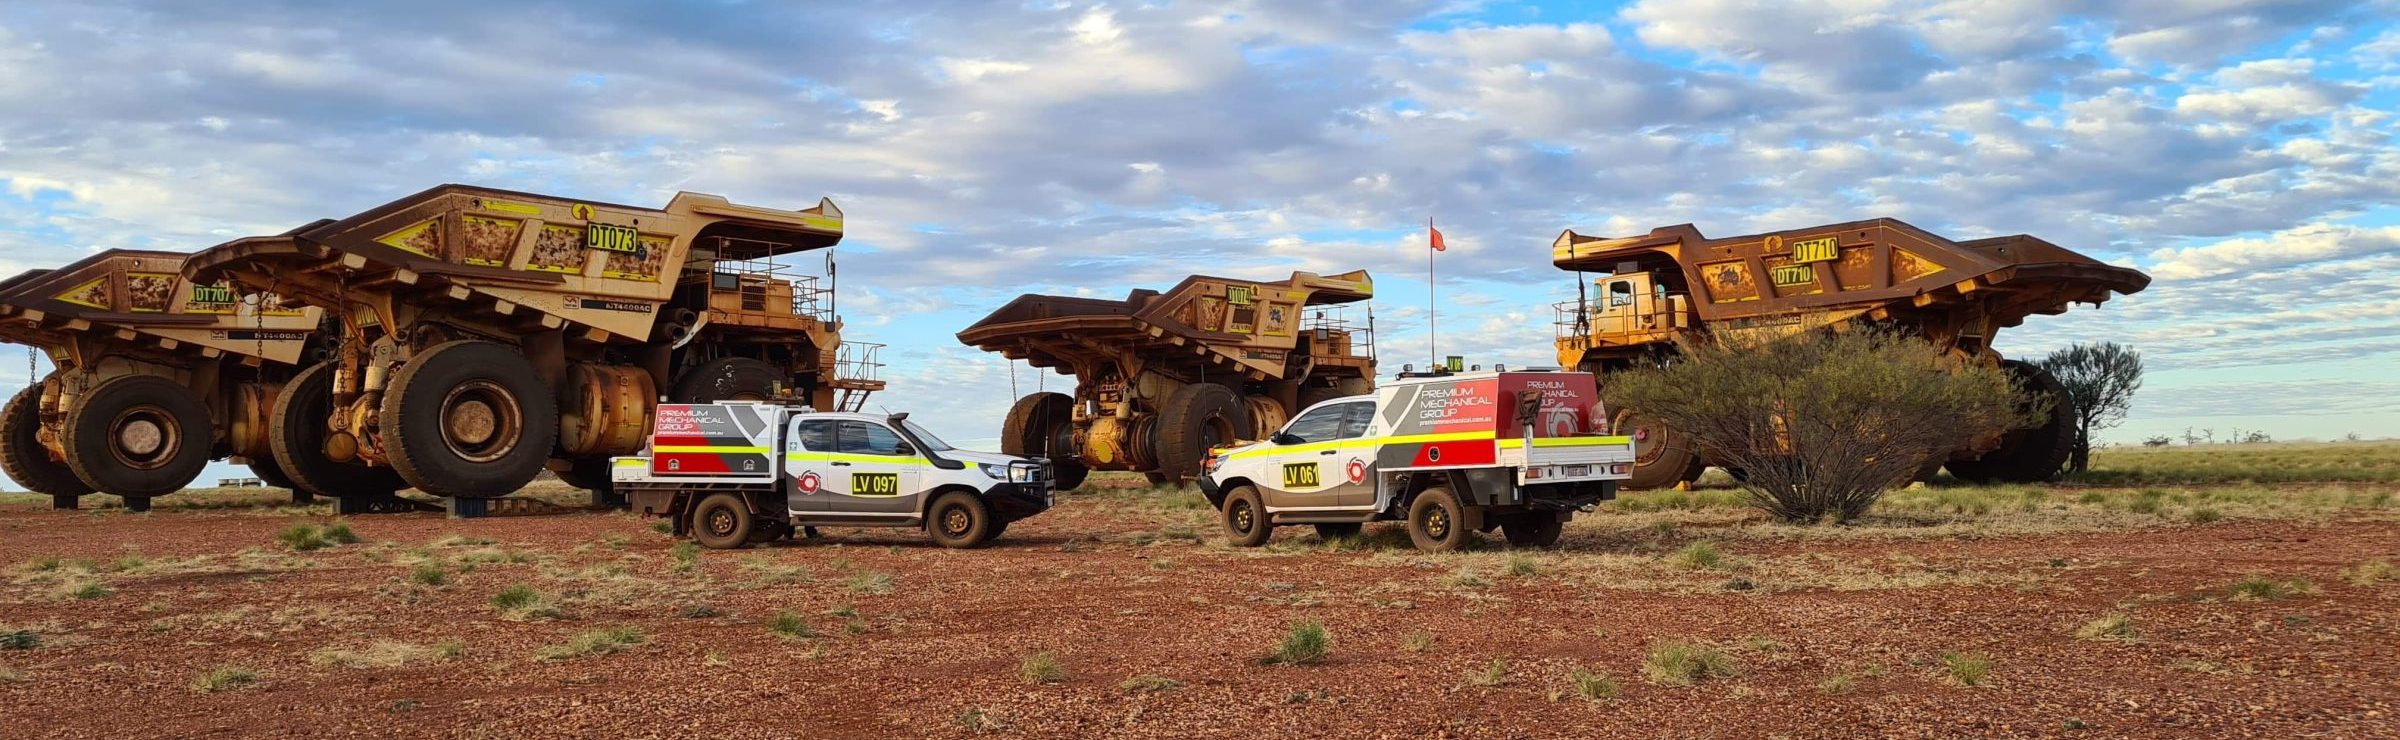 Three large trucks and a bulldozer with large tires, seen in a mining site.